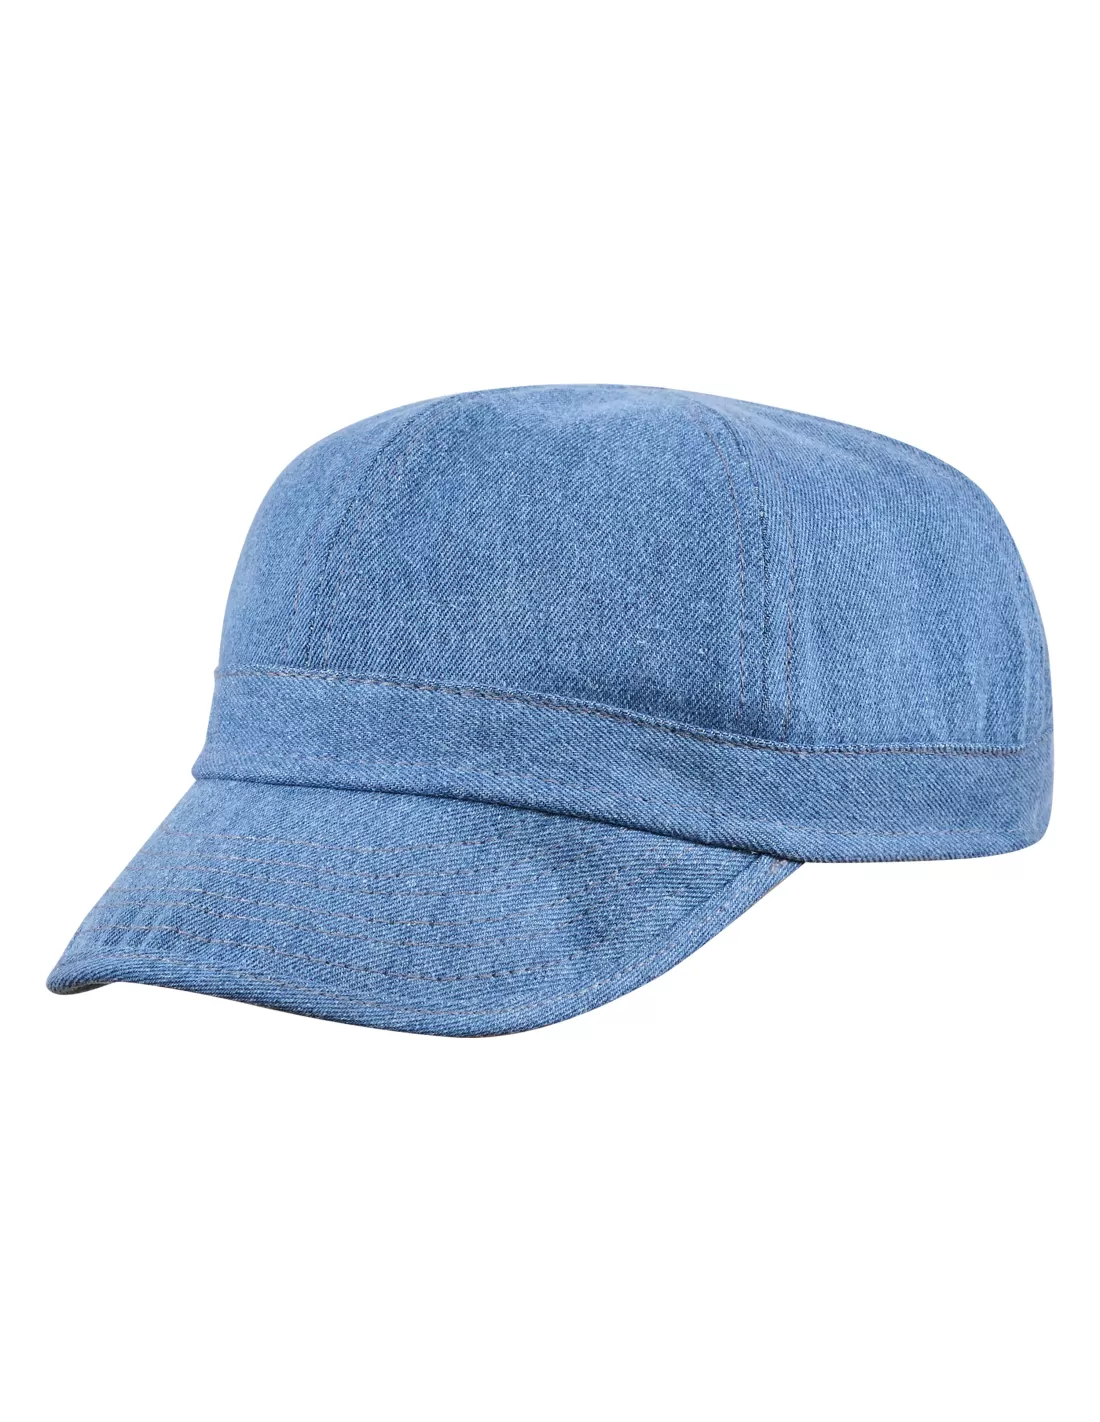 Mechanic - cap made of denim with high sun protection Size 54 cm Color ...